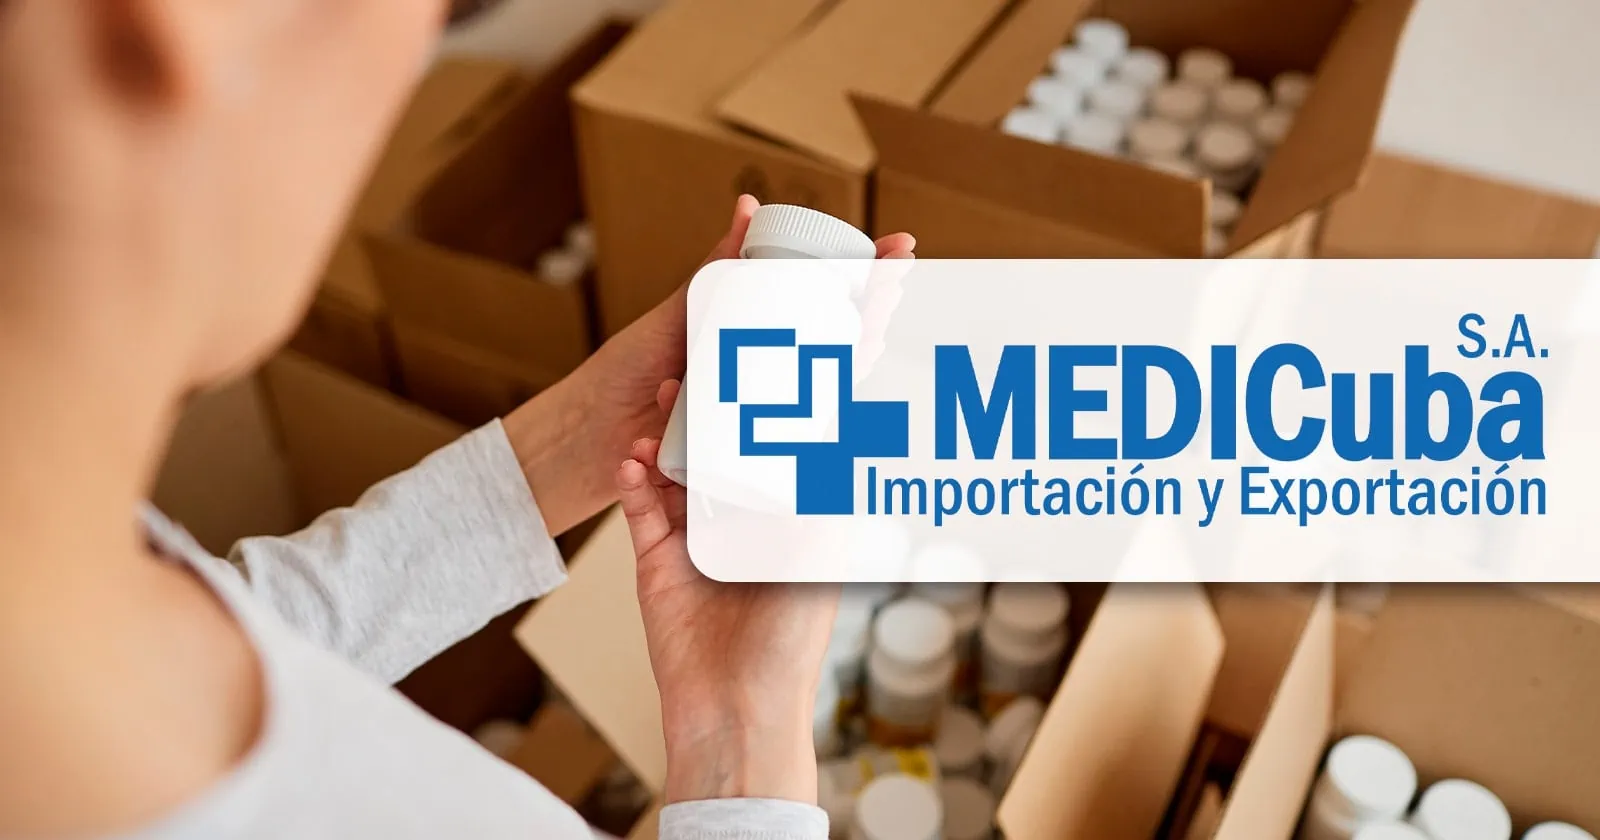 This is What Medicuba Says The United States Does Not Export Medical Supplies to Cuba